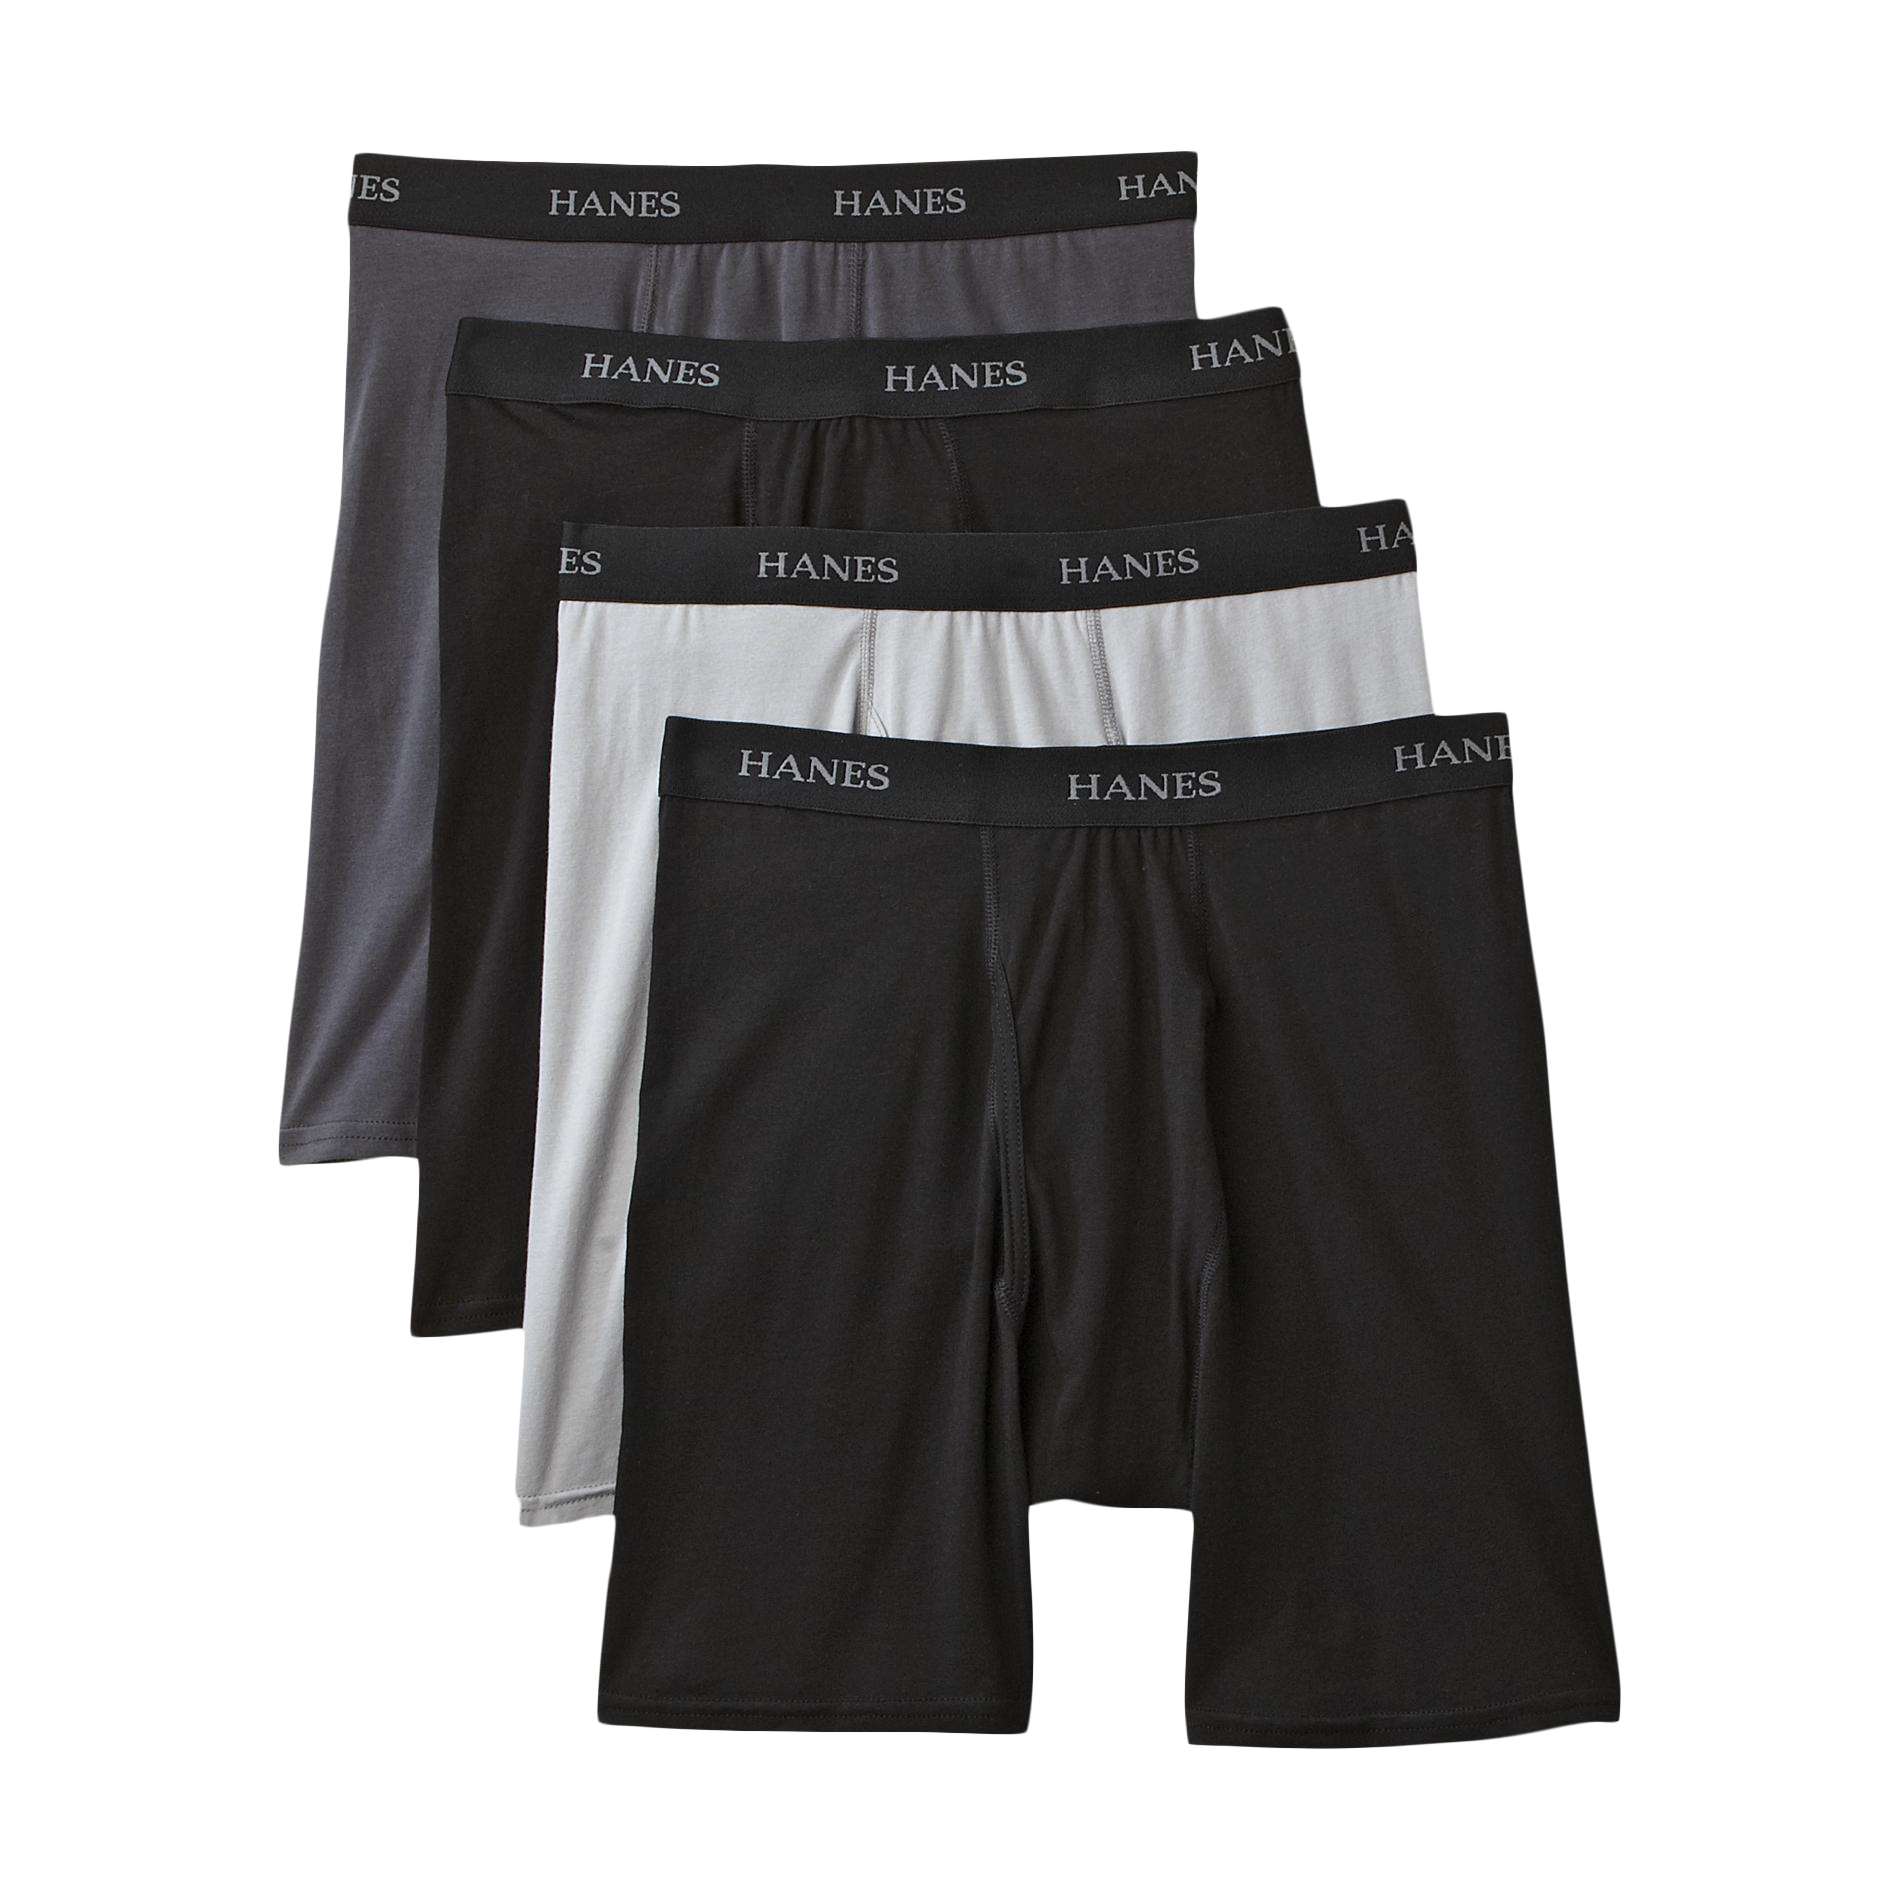 Hanes 4-Pack Men's Stretch Boxer Briefs - Extra Long